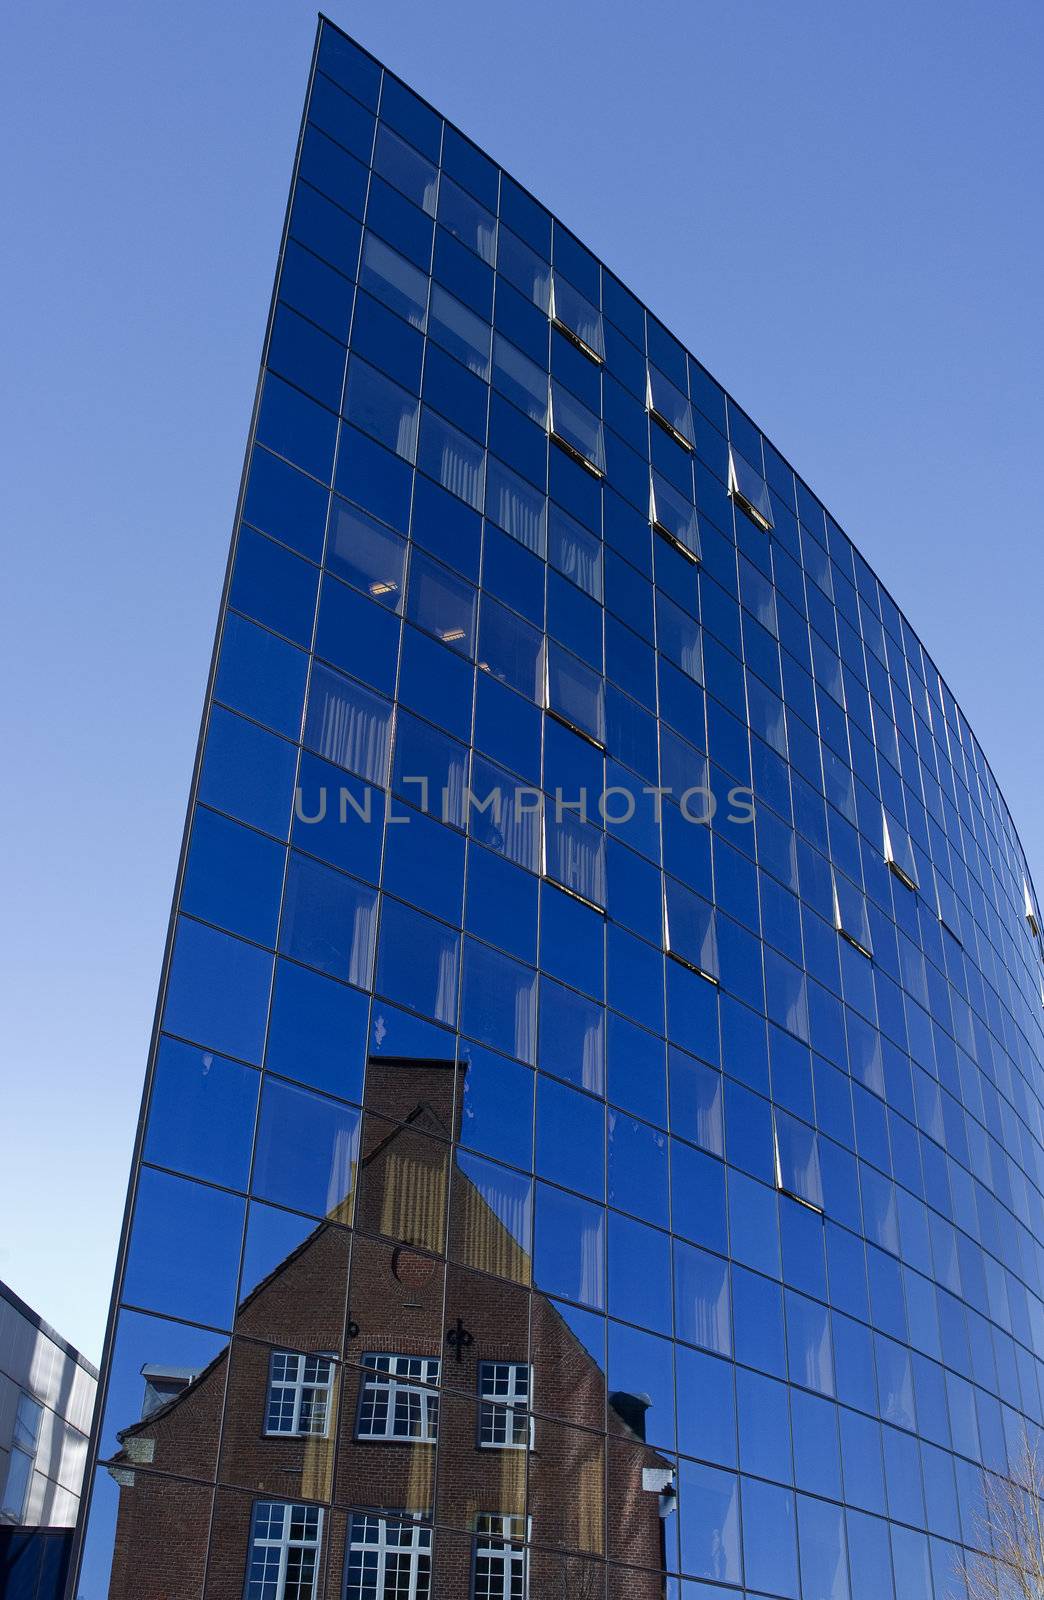 Futuristic public hospital building with reflection of old hospital building.